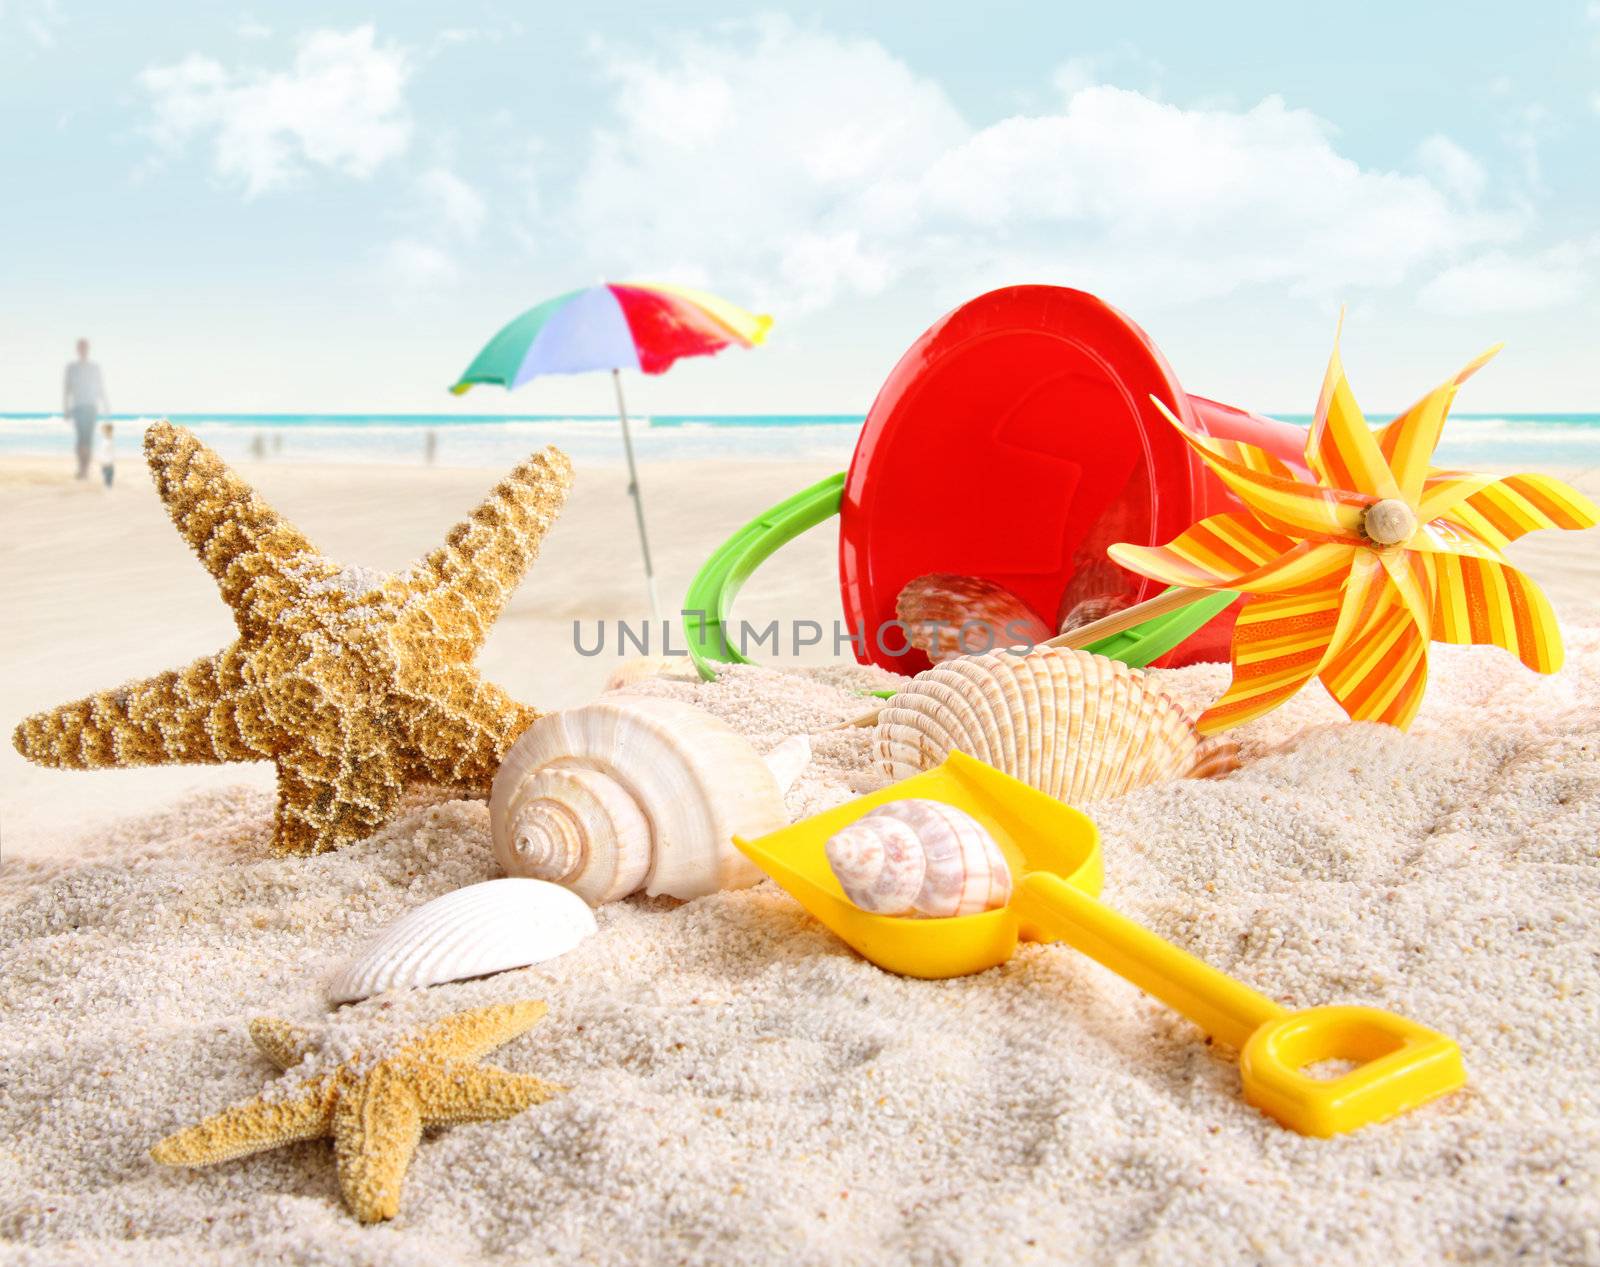 Children's beach toys at the beach by Sandralise